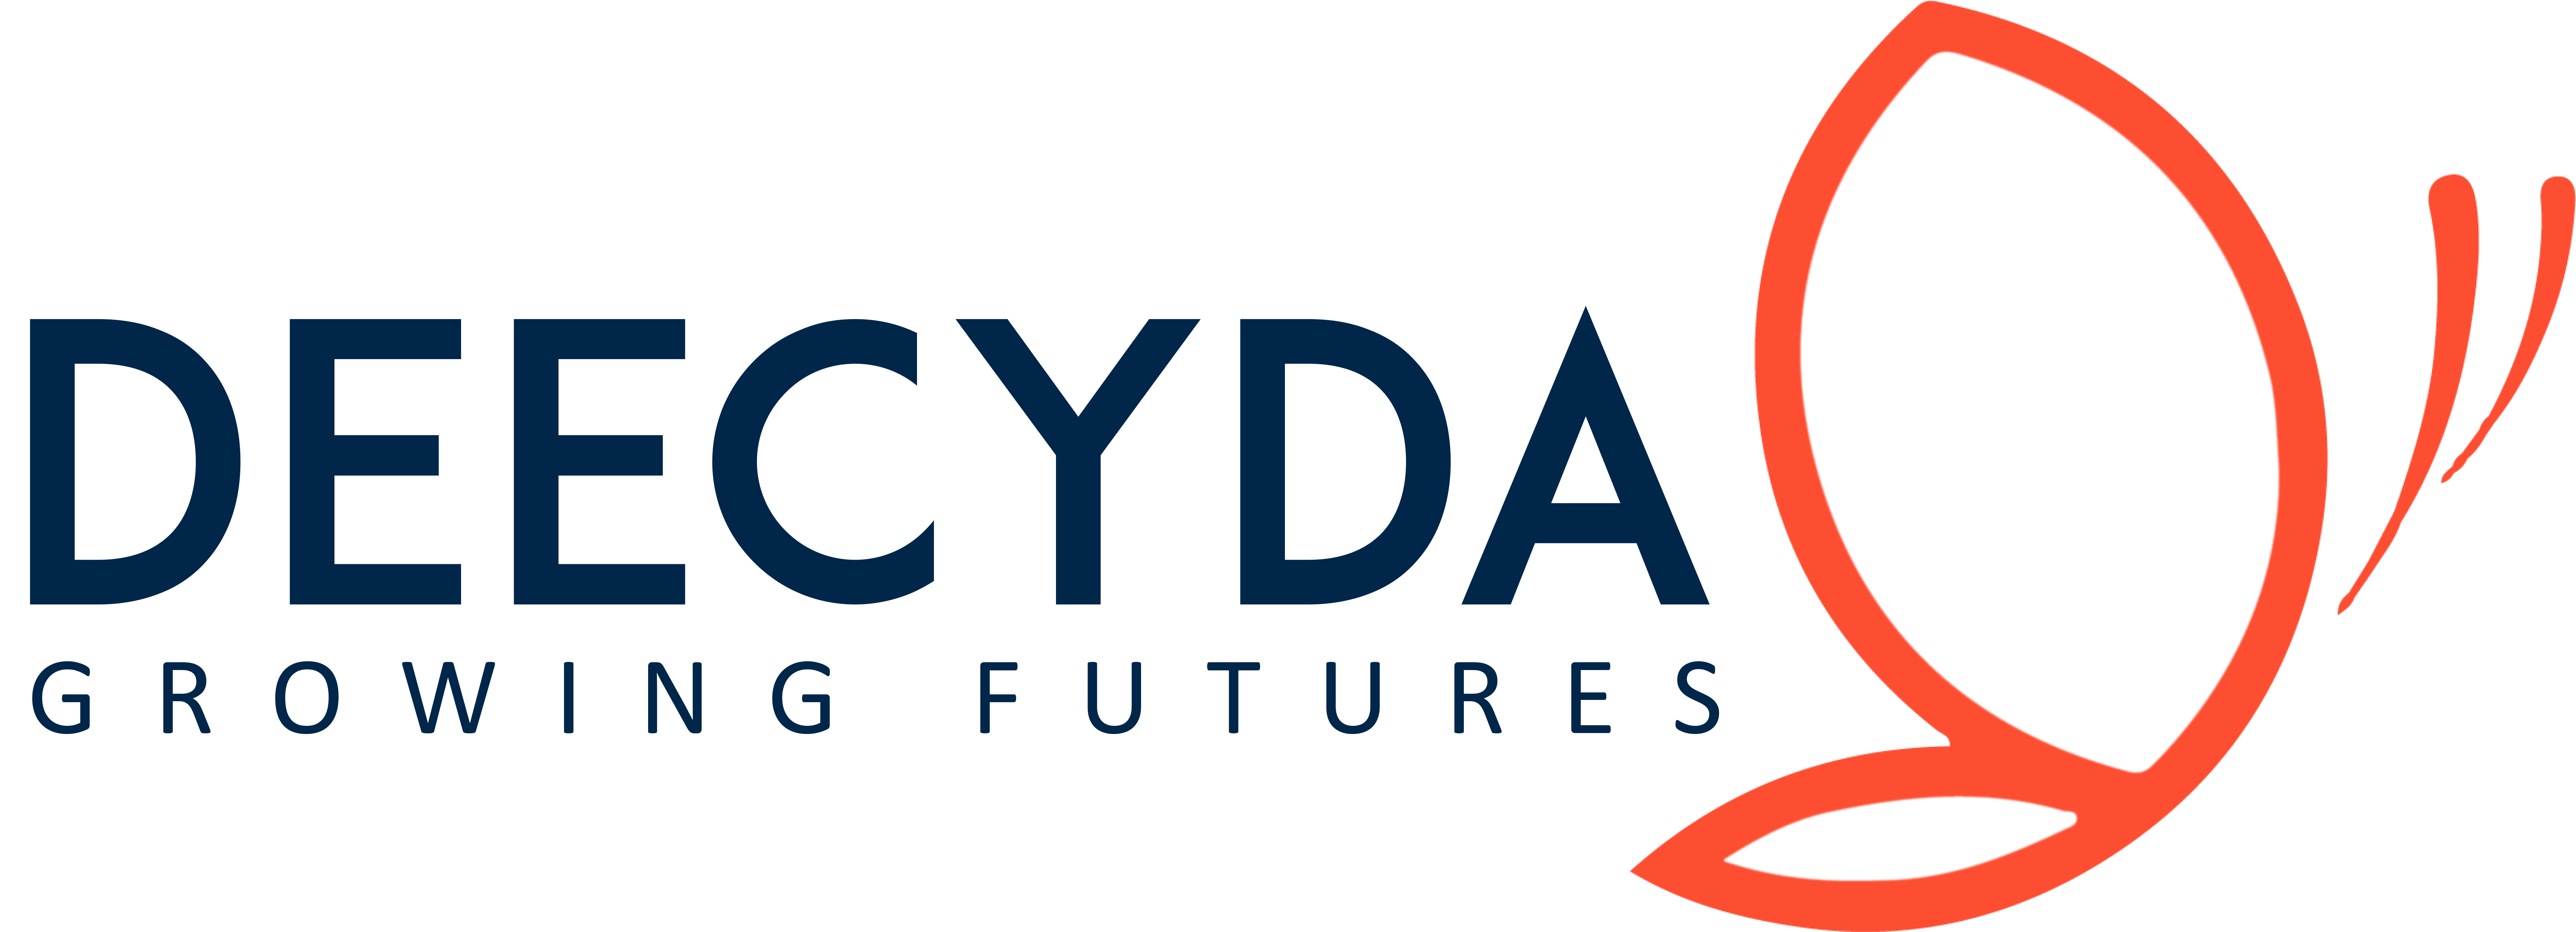 DeeCyDa Child Care & Learning Center | Irvine Top Day Care